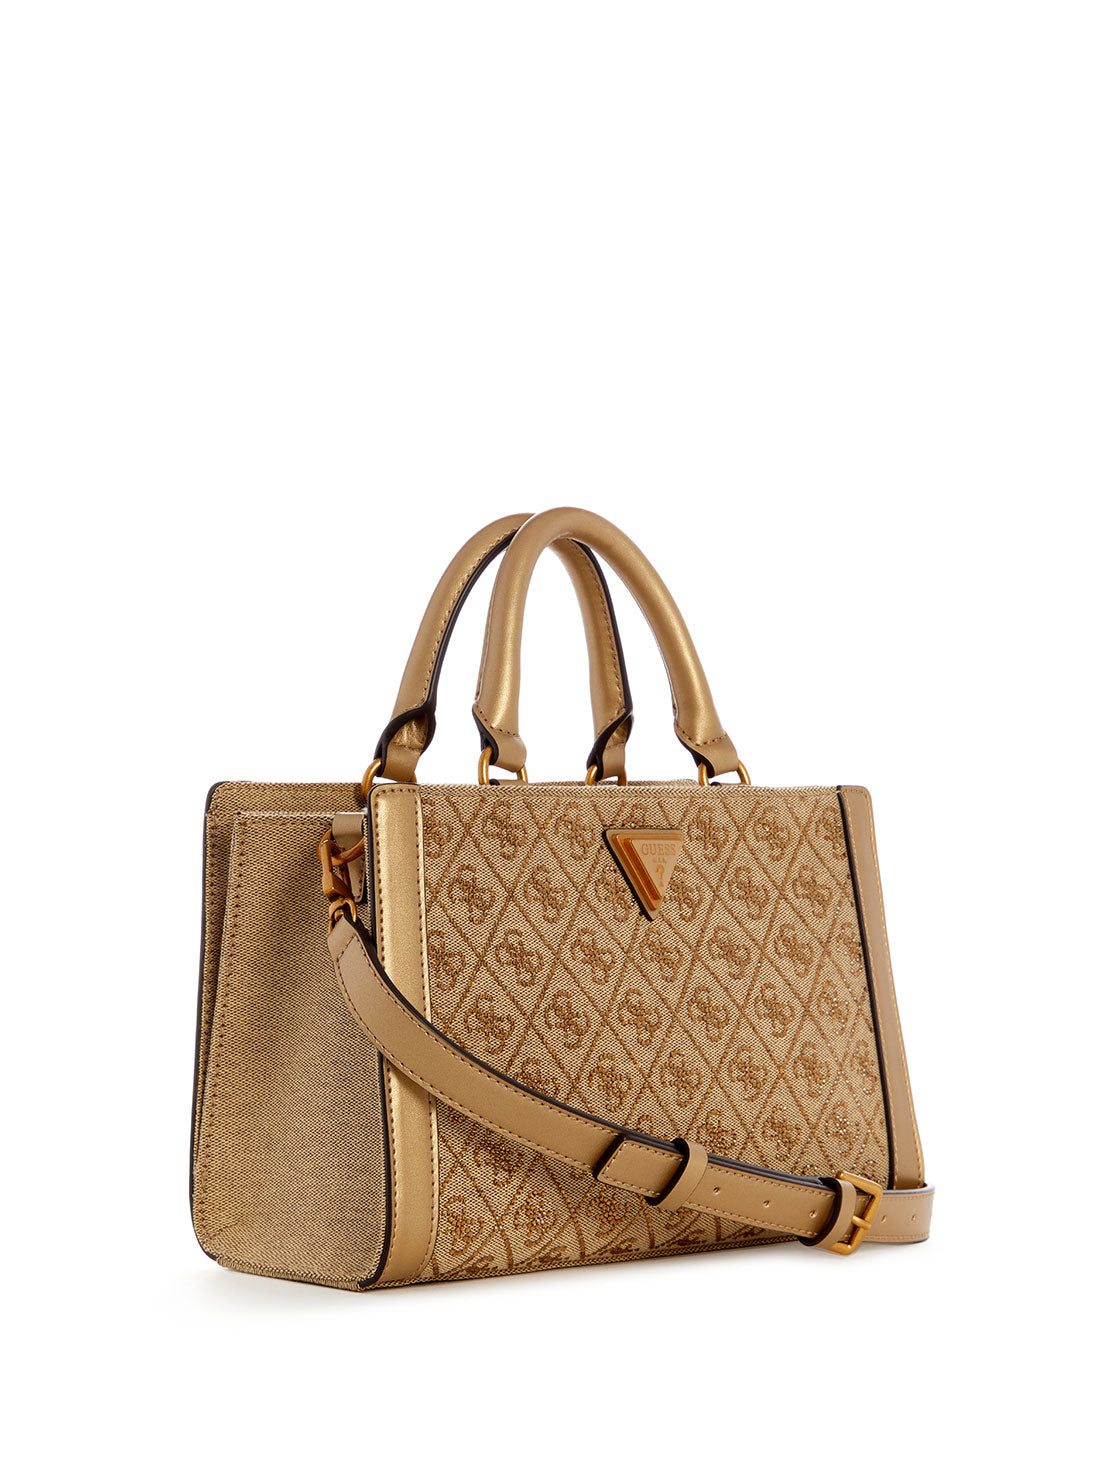 GUESS Gold Logo Small Satchel Bag side view